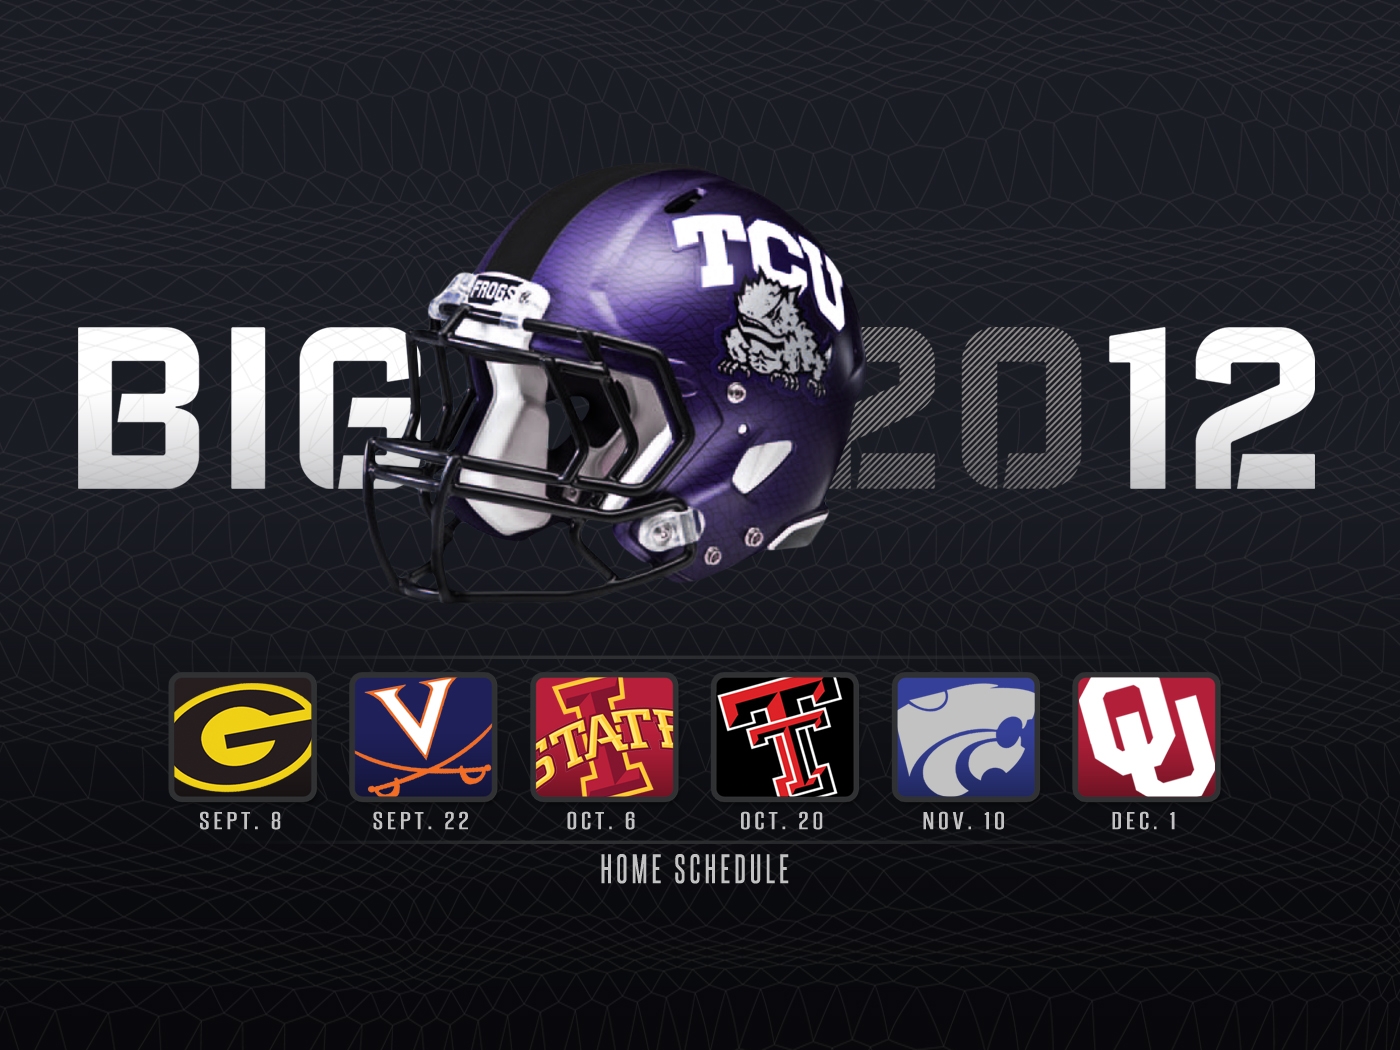 Gofrogs Tcu Horned Frogs Official Athletic Site